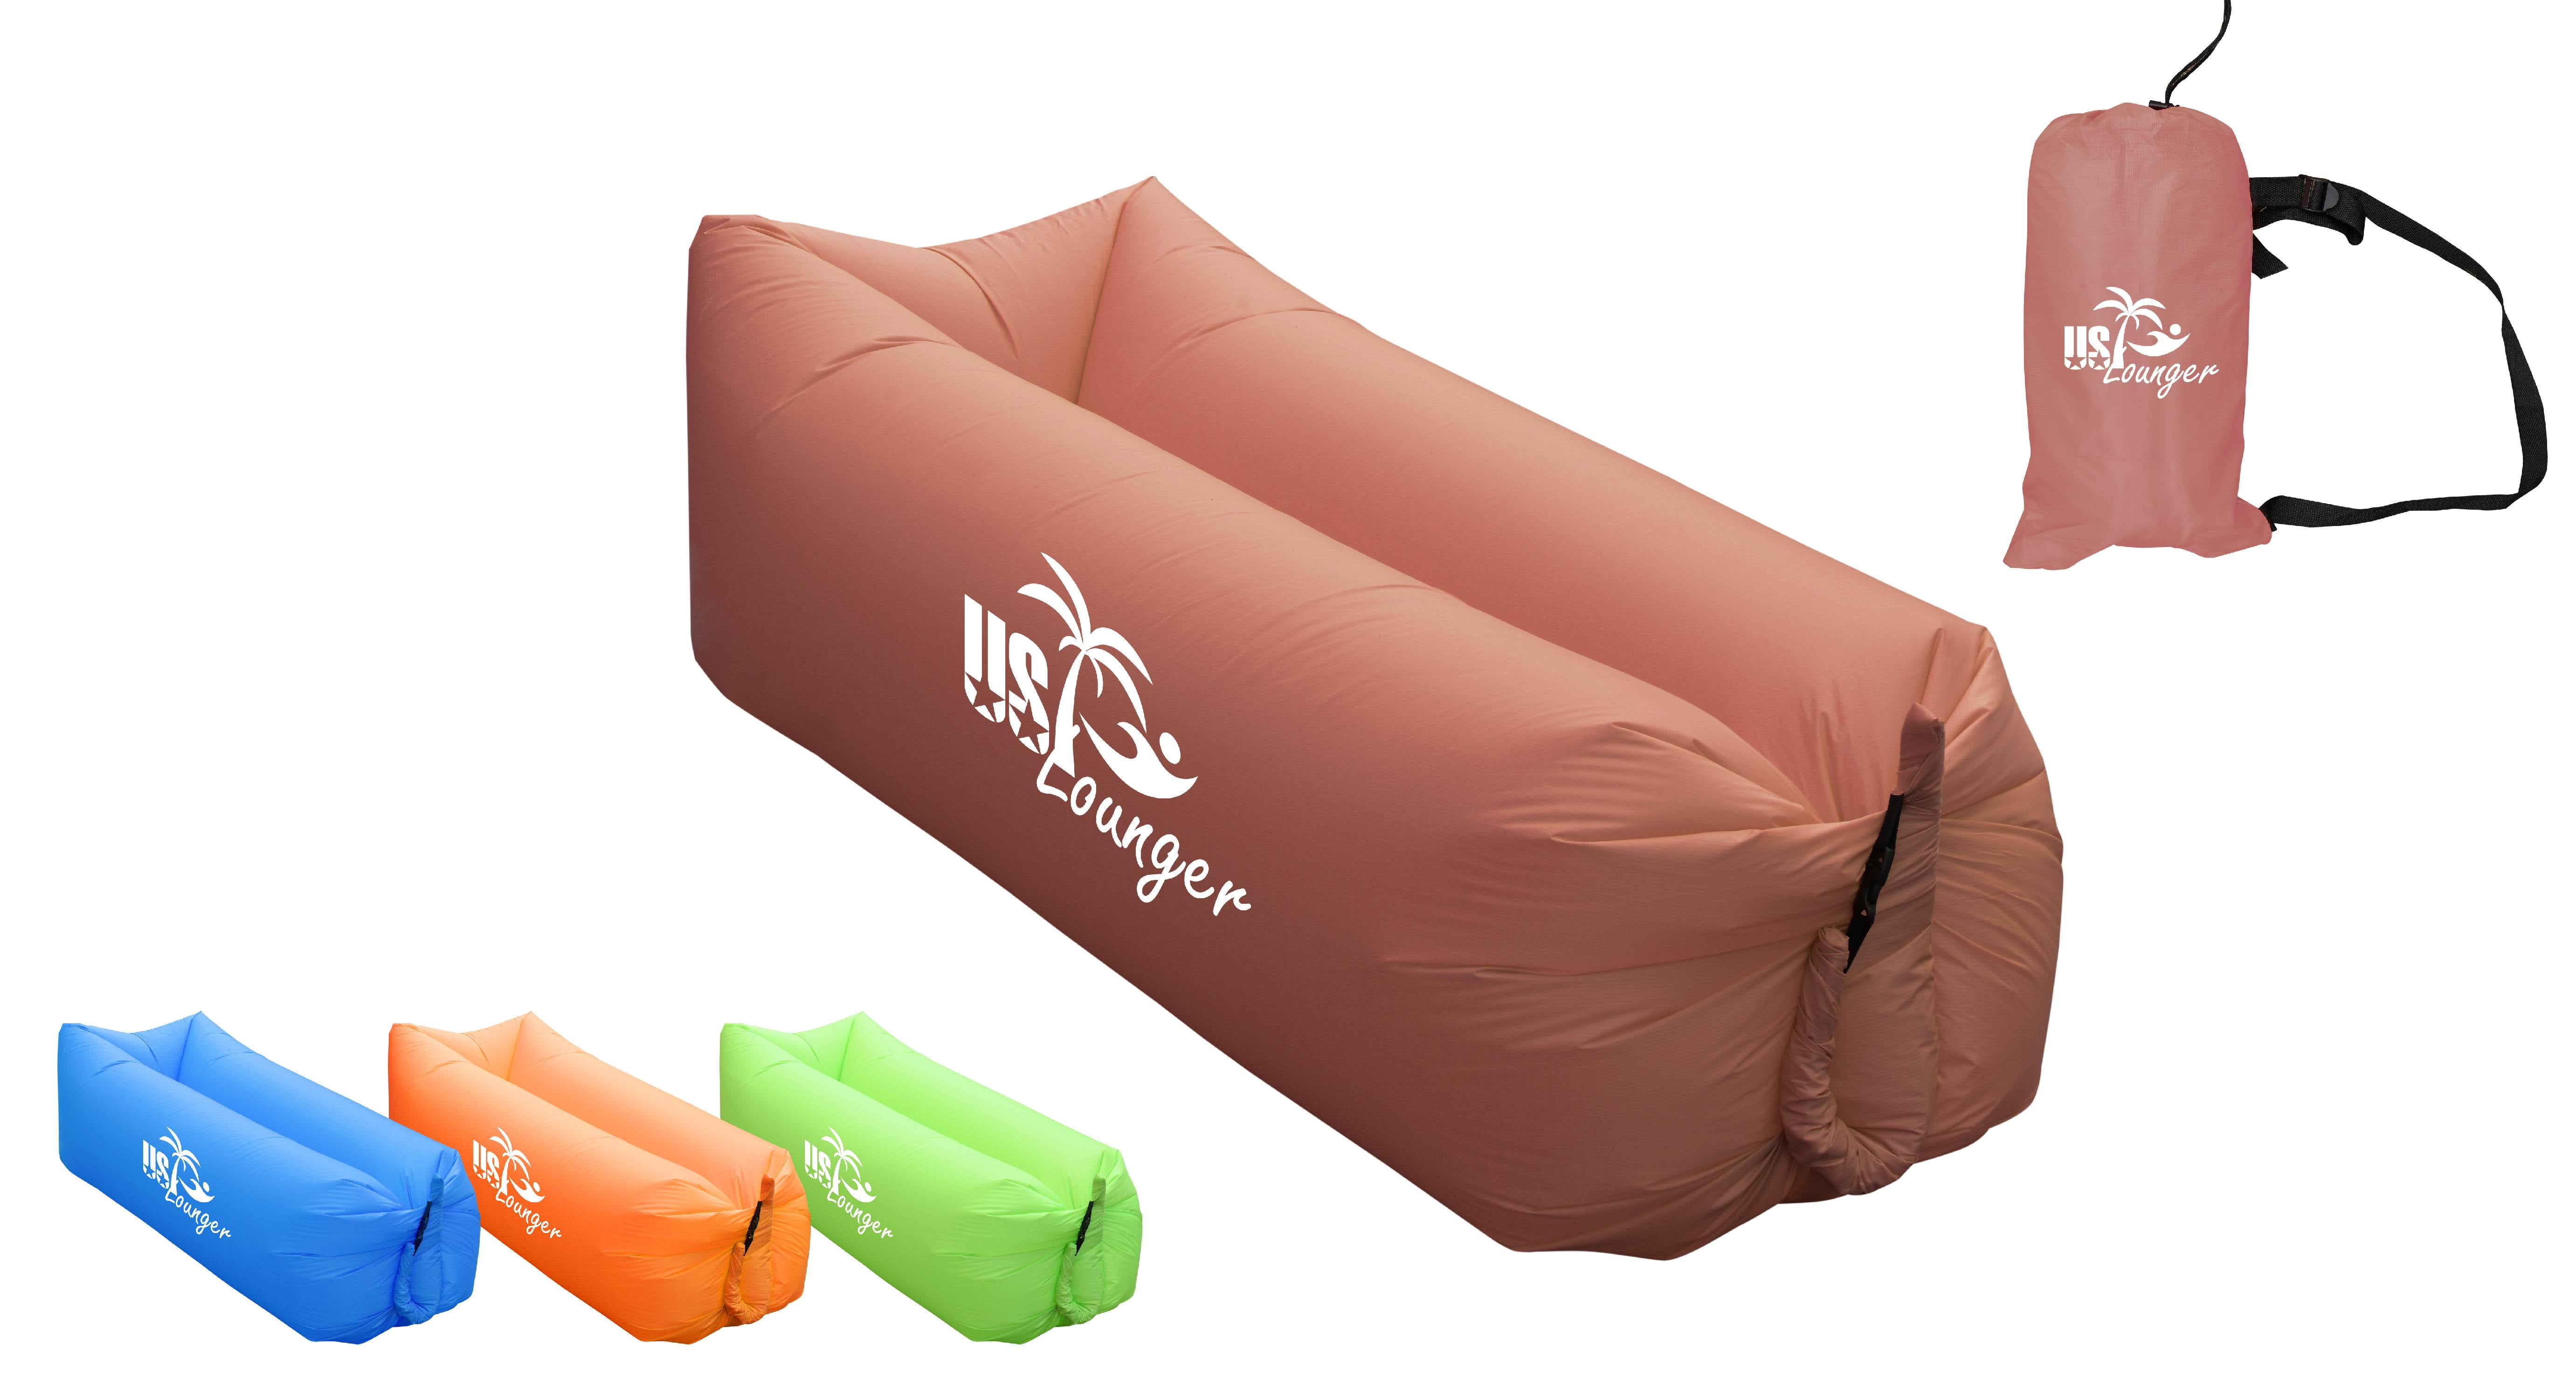 wind bed lounger